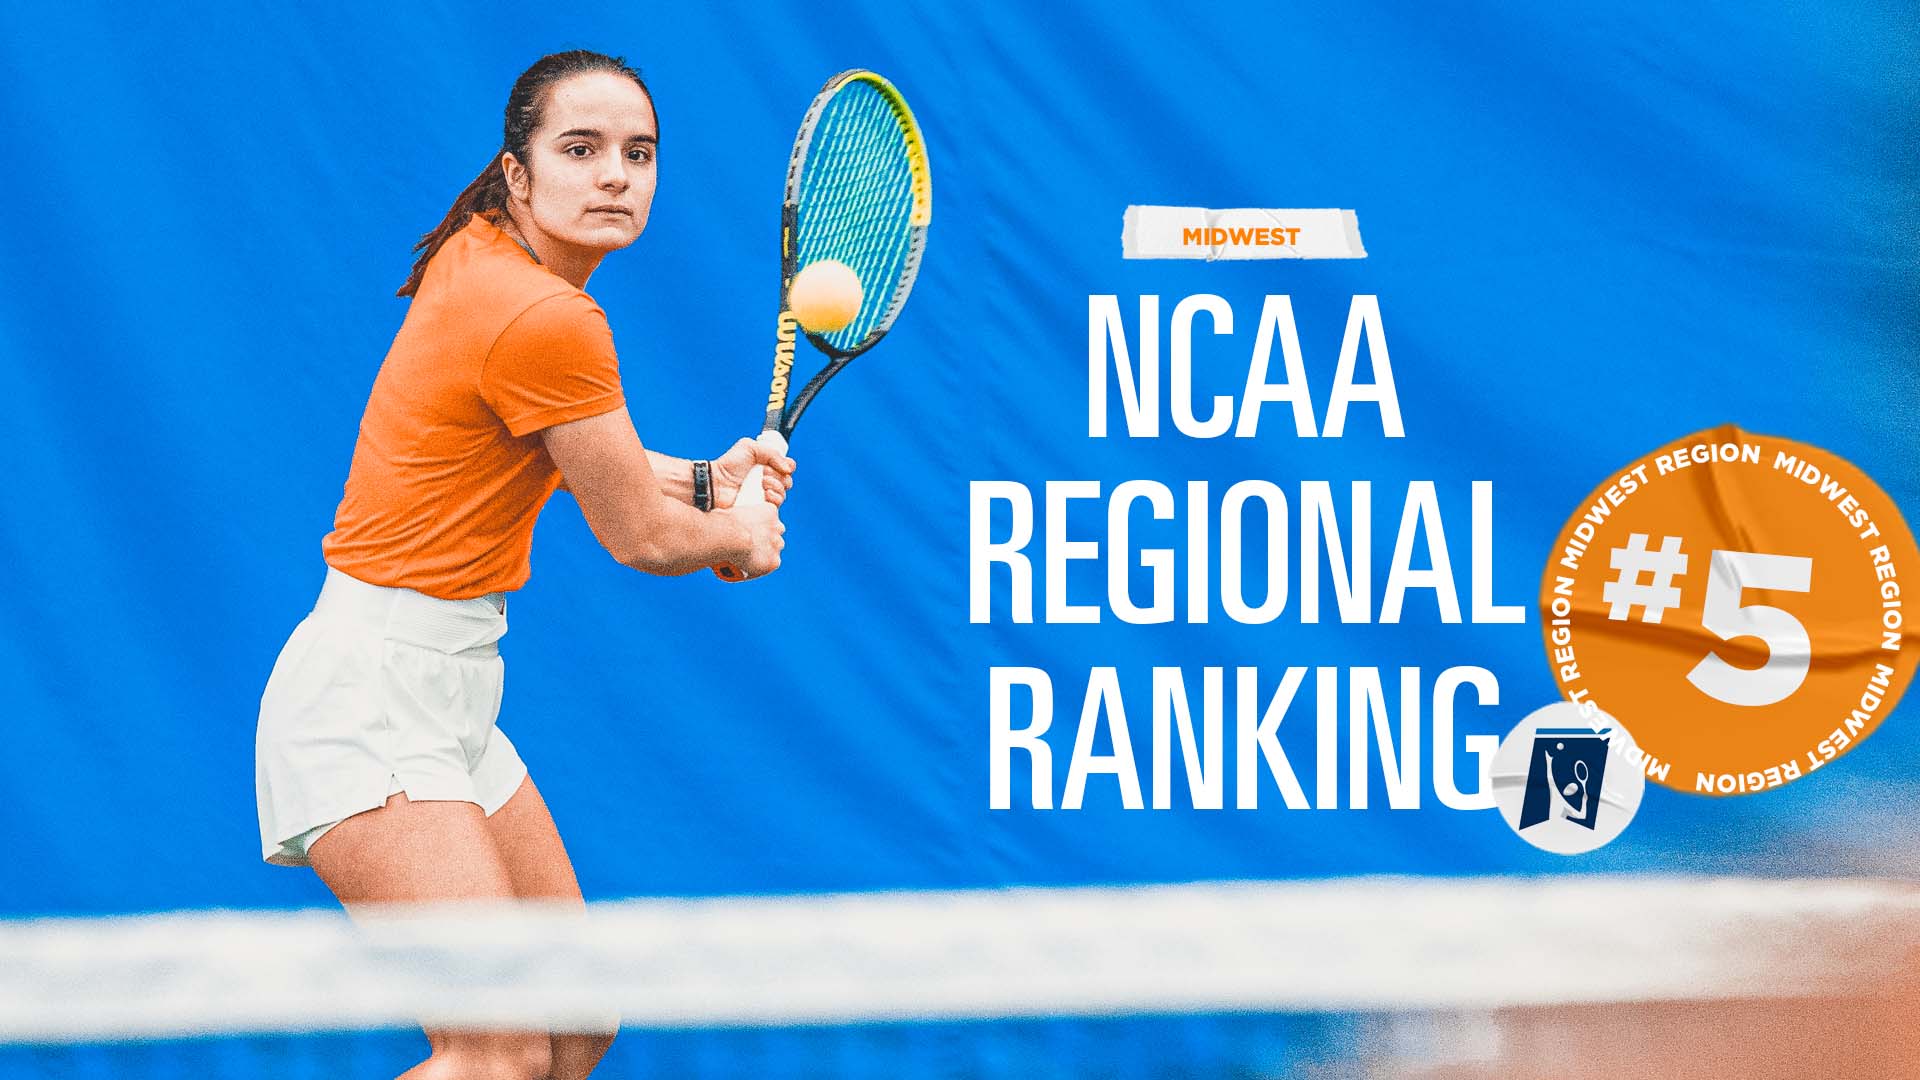 Oilers Under Consideration in First NCAA Regional Release